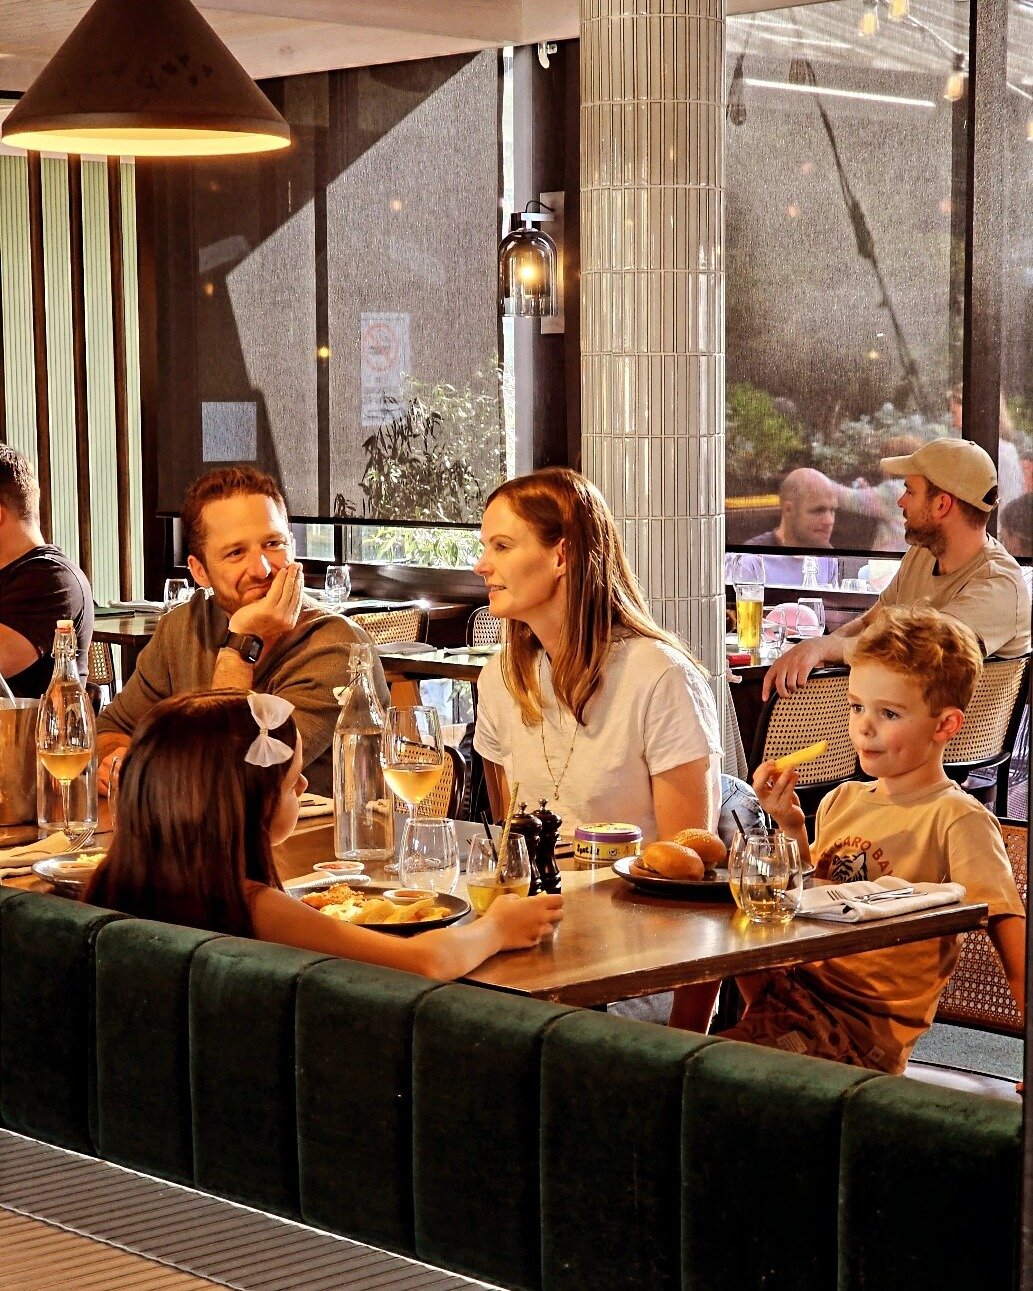 Make your weekend easier with our Sunday Kids Eat Free! Just bring your family over and enjoy the quality time with them. We will take care of the rest!

#thecamden #lovefood #love #eat #instagood #yum #foodpics #delish #tasty #foodpic #foodlover #ha